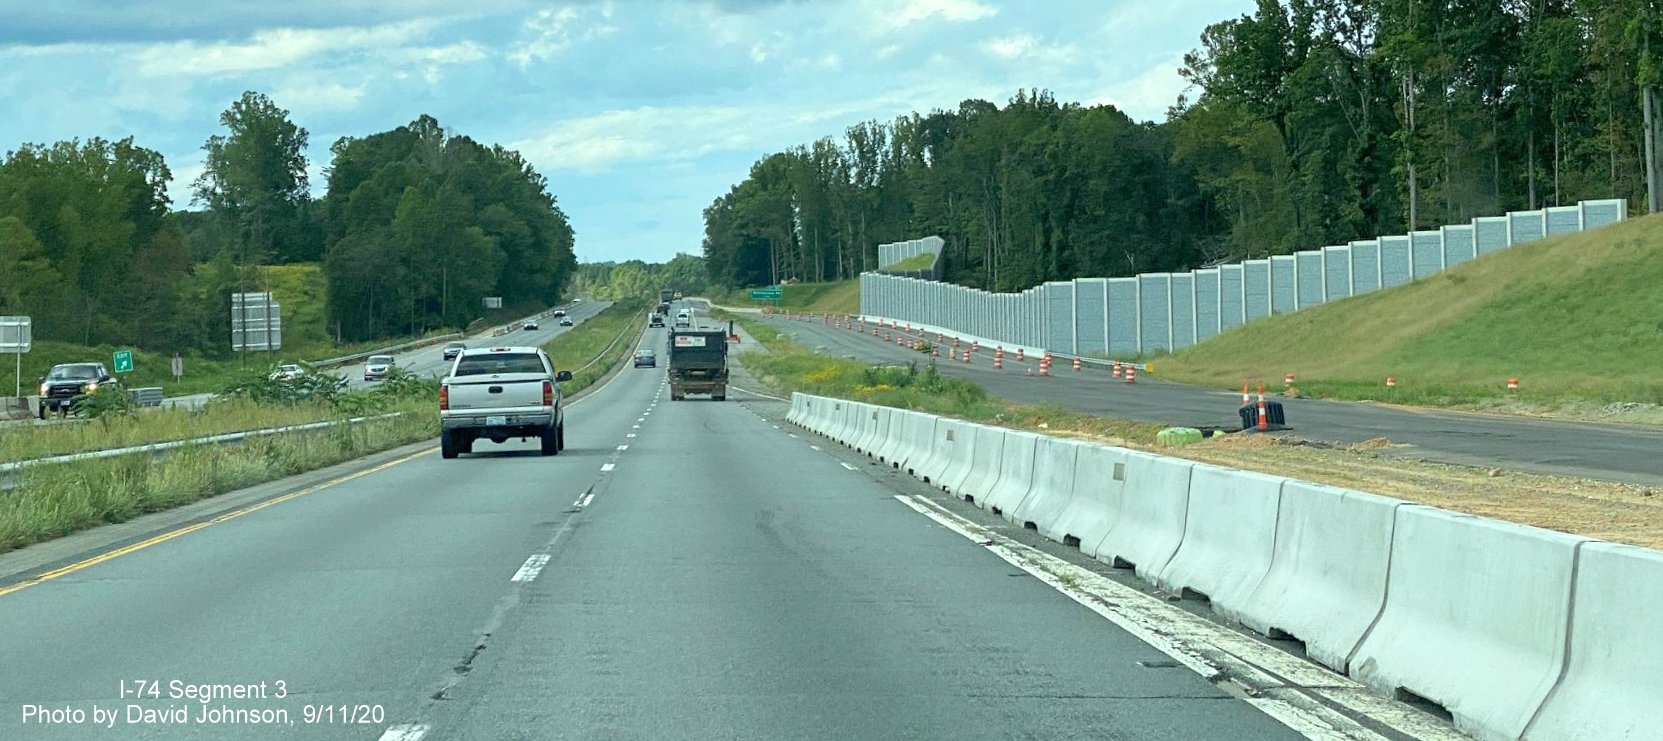 Image of future I-74 West ramp from Winston Salem Northern Beltway merging onto US 52 North, by David Johnson September 2020